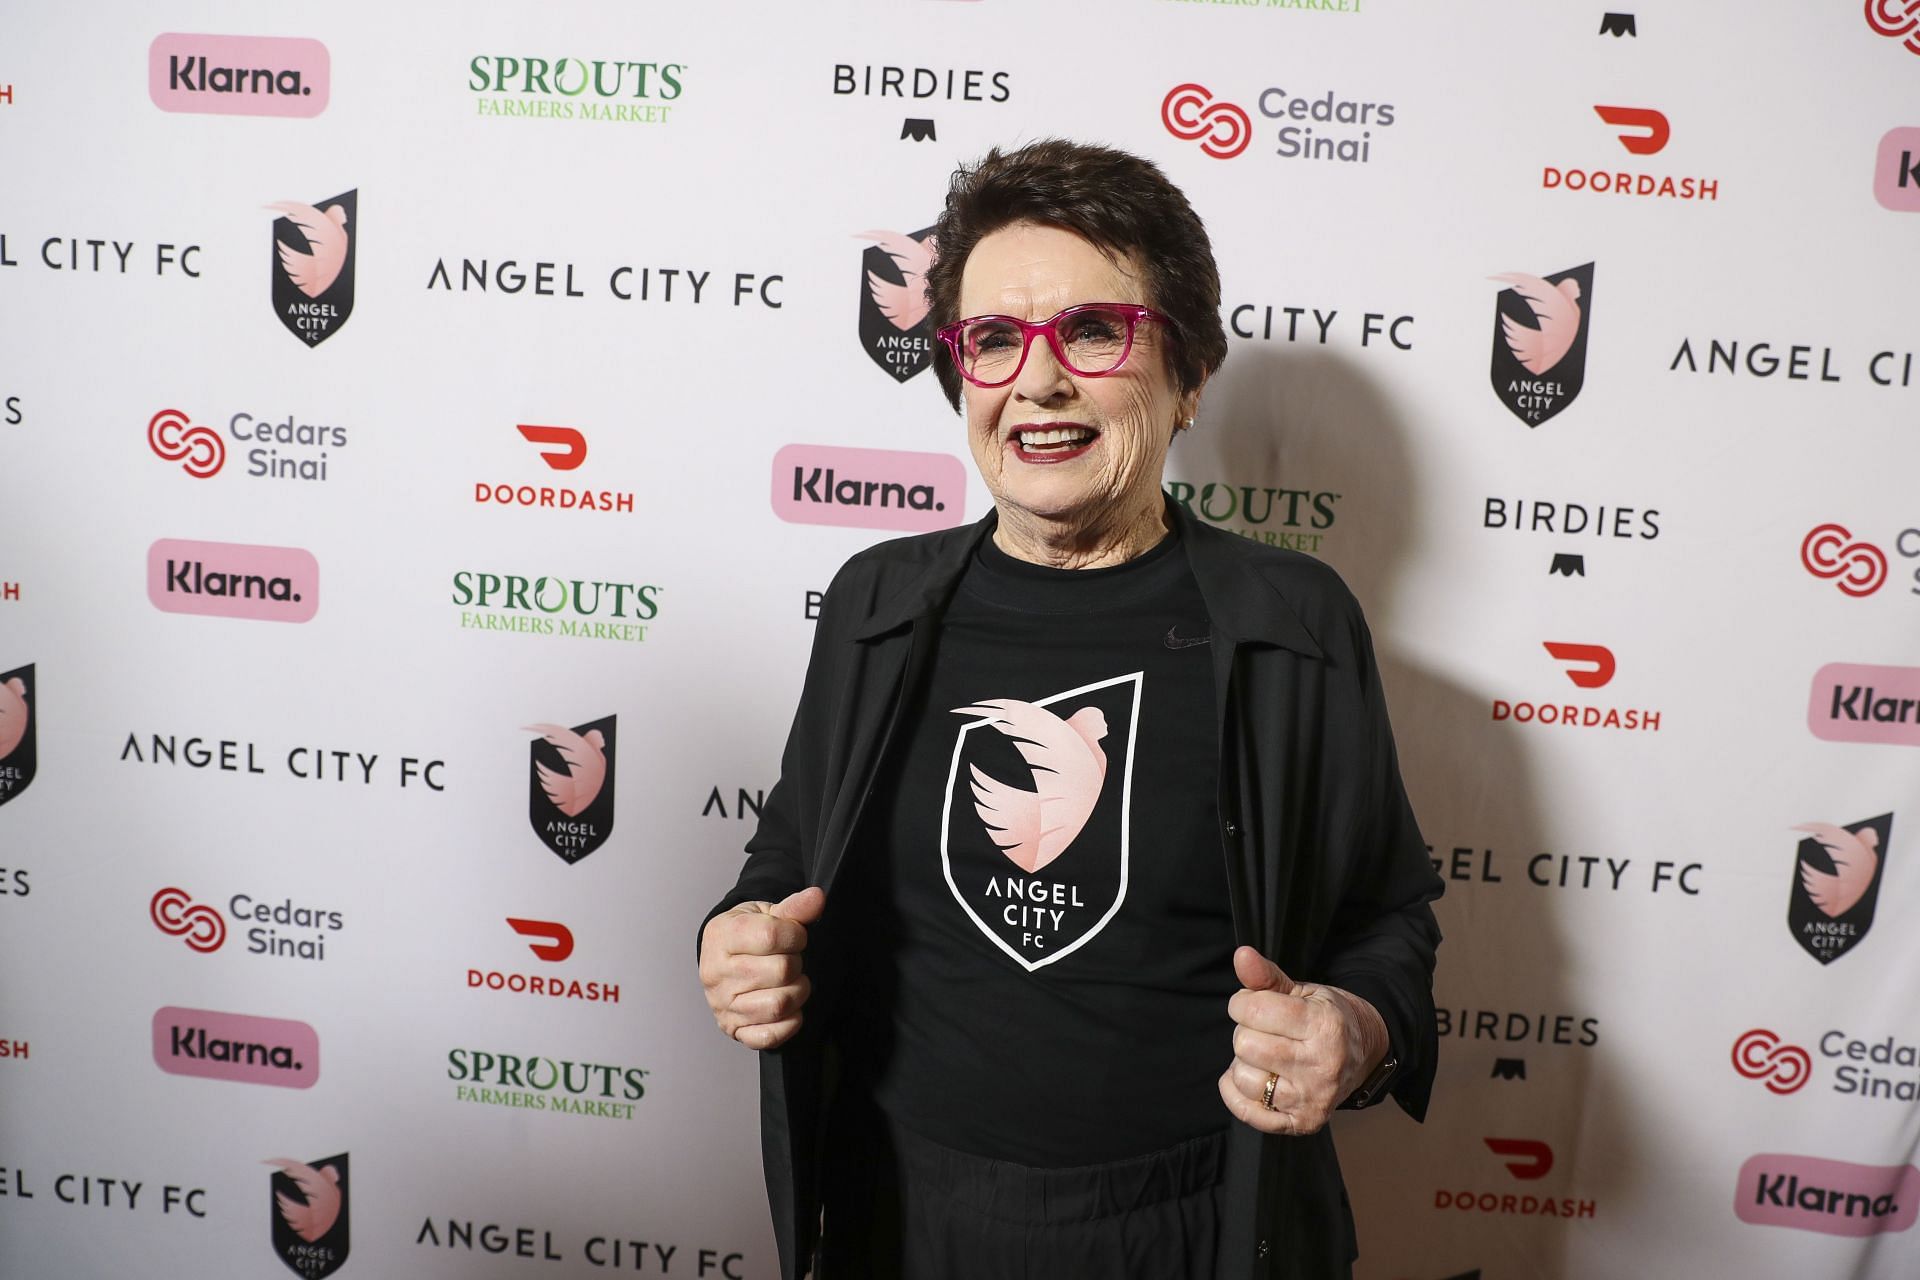 Billie Jean King also expressed her displeasure with the decision of the US Supreme Court